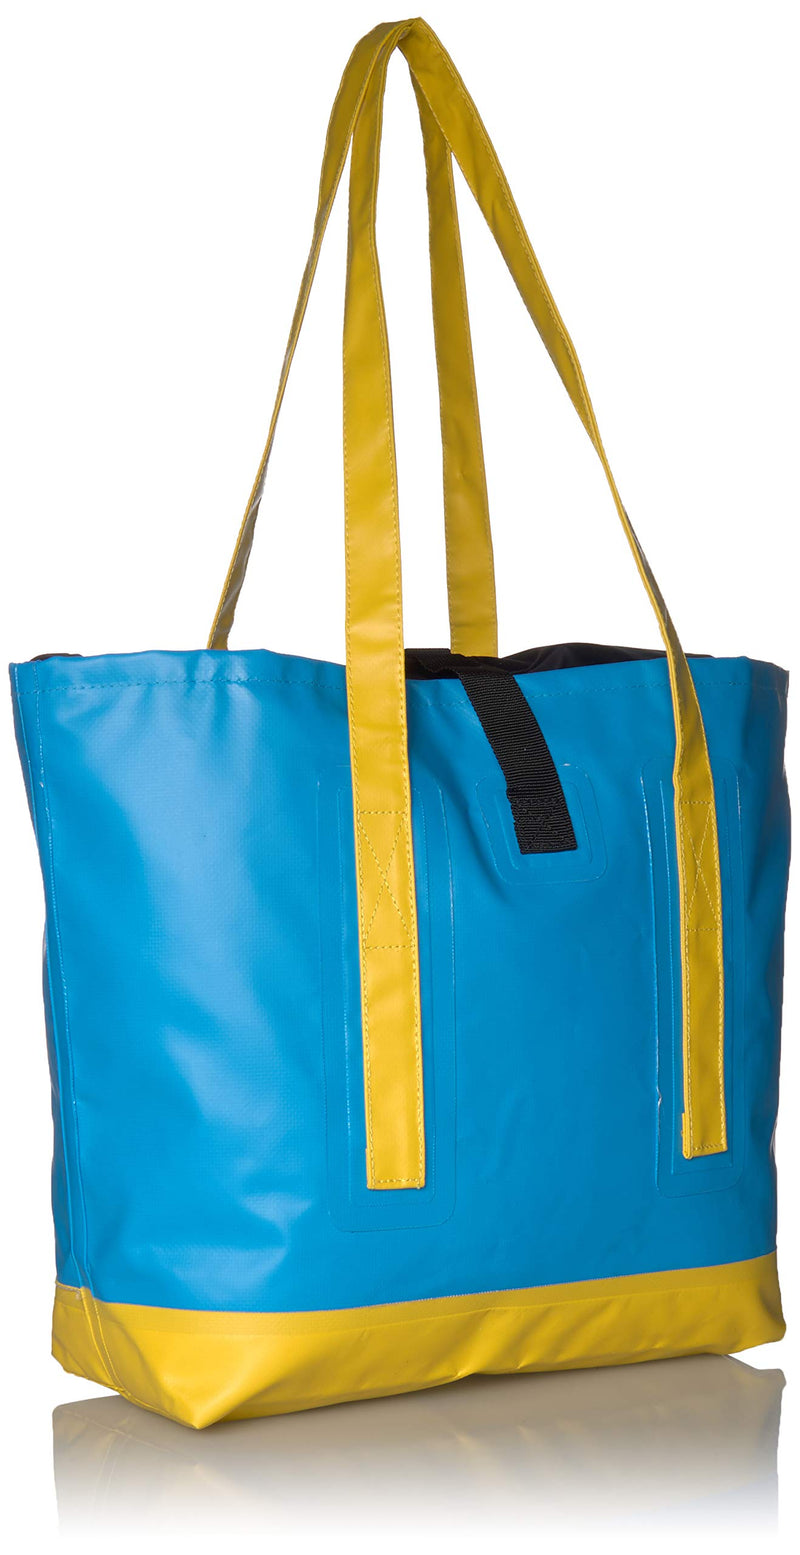 [AUSTRALIA] - Grizzly Peak 15L Dri-Tech Waterproof Beach Tote Dry Bag - IP 66 Lightweight Roll-Top Sack with Carrying Straps – Pouch for Protecting Valuables & Belongings at The Beach, Camping, Outdoors 